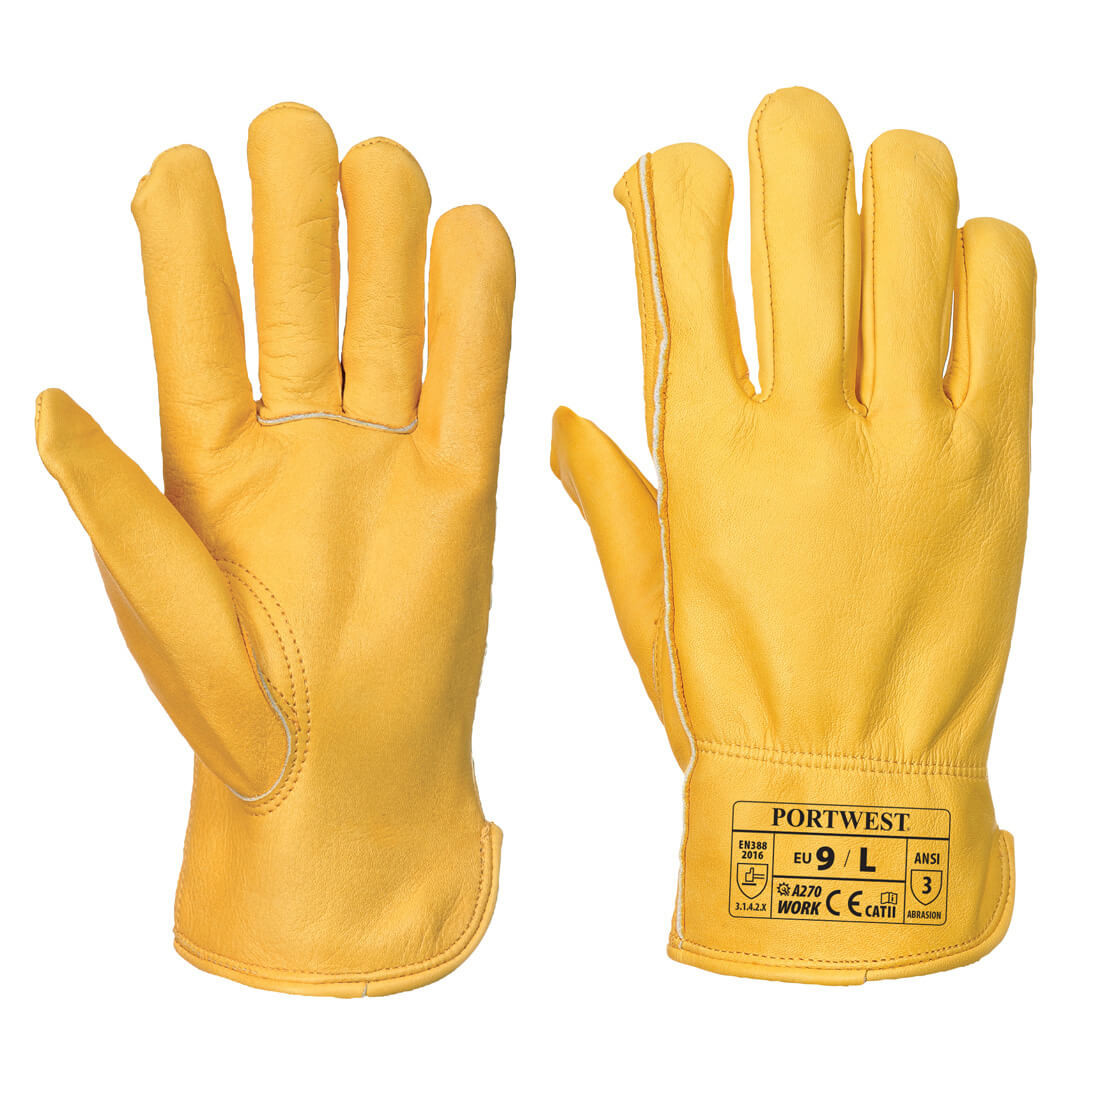 Classic Driver Glove - Personal protection